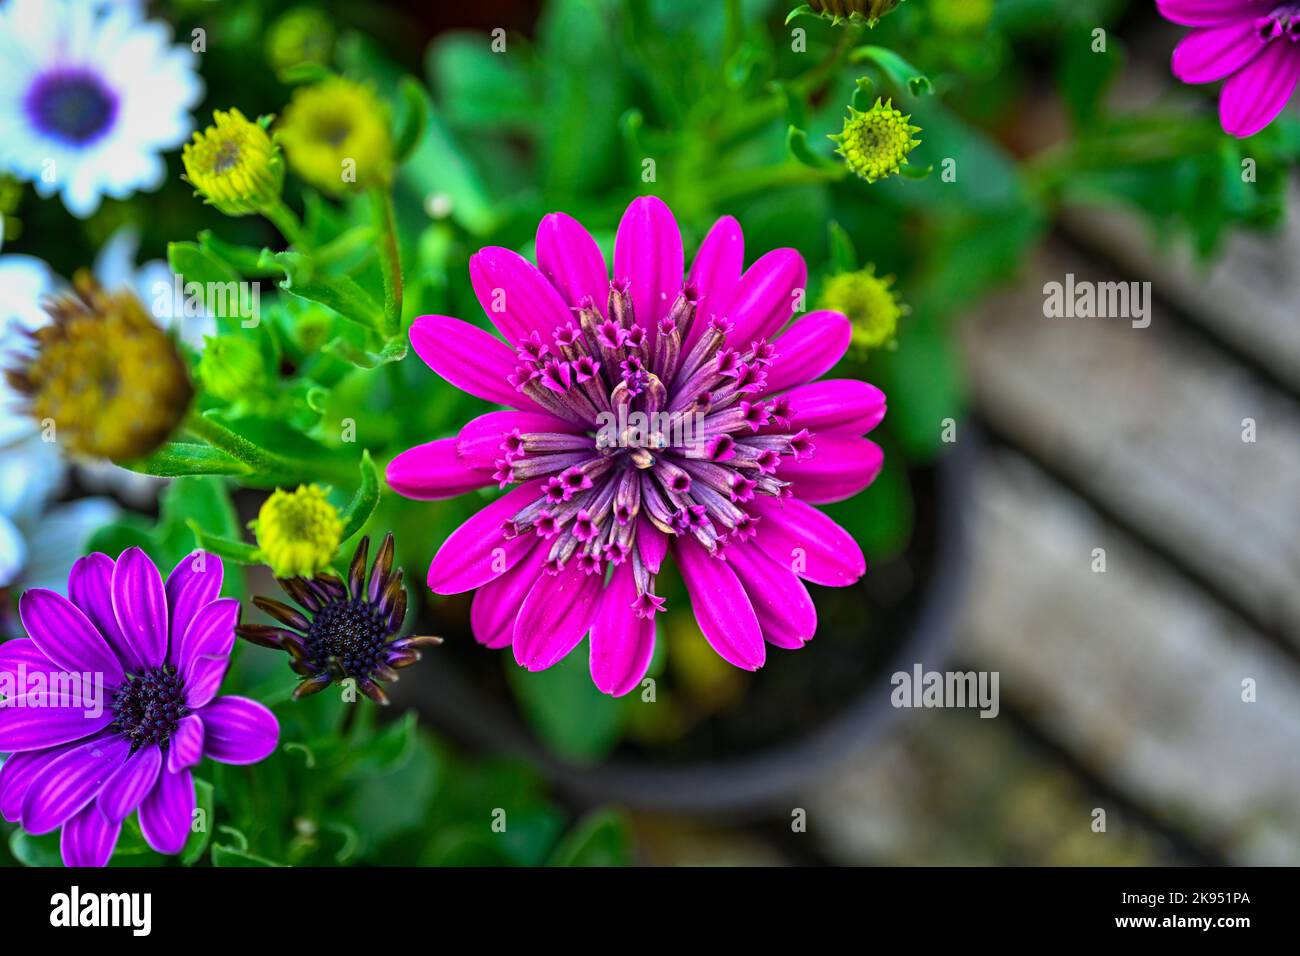 A top view of a delicate double African daisy captured in a flower garden Stock Photo